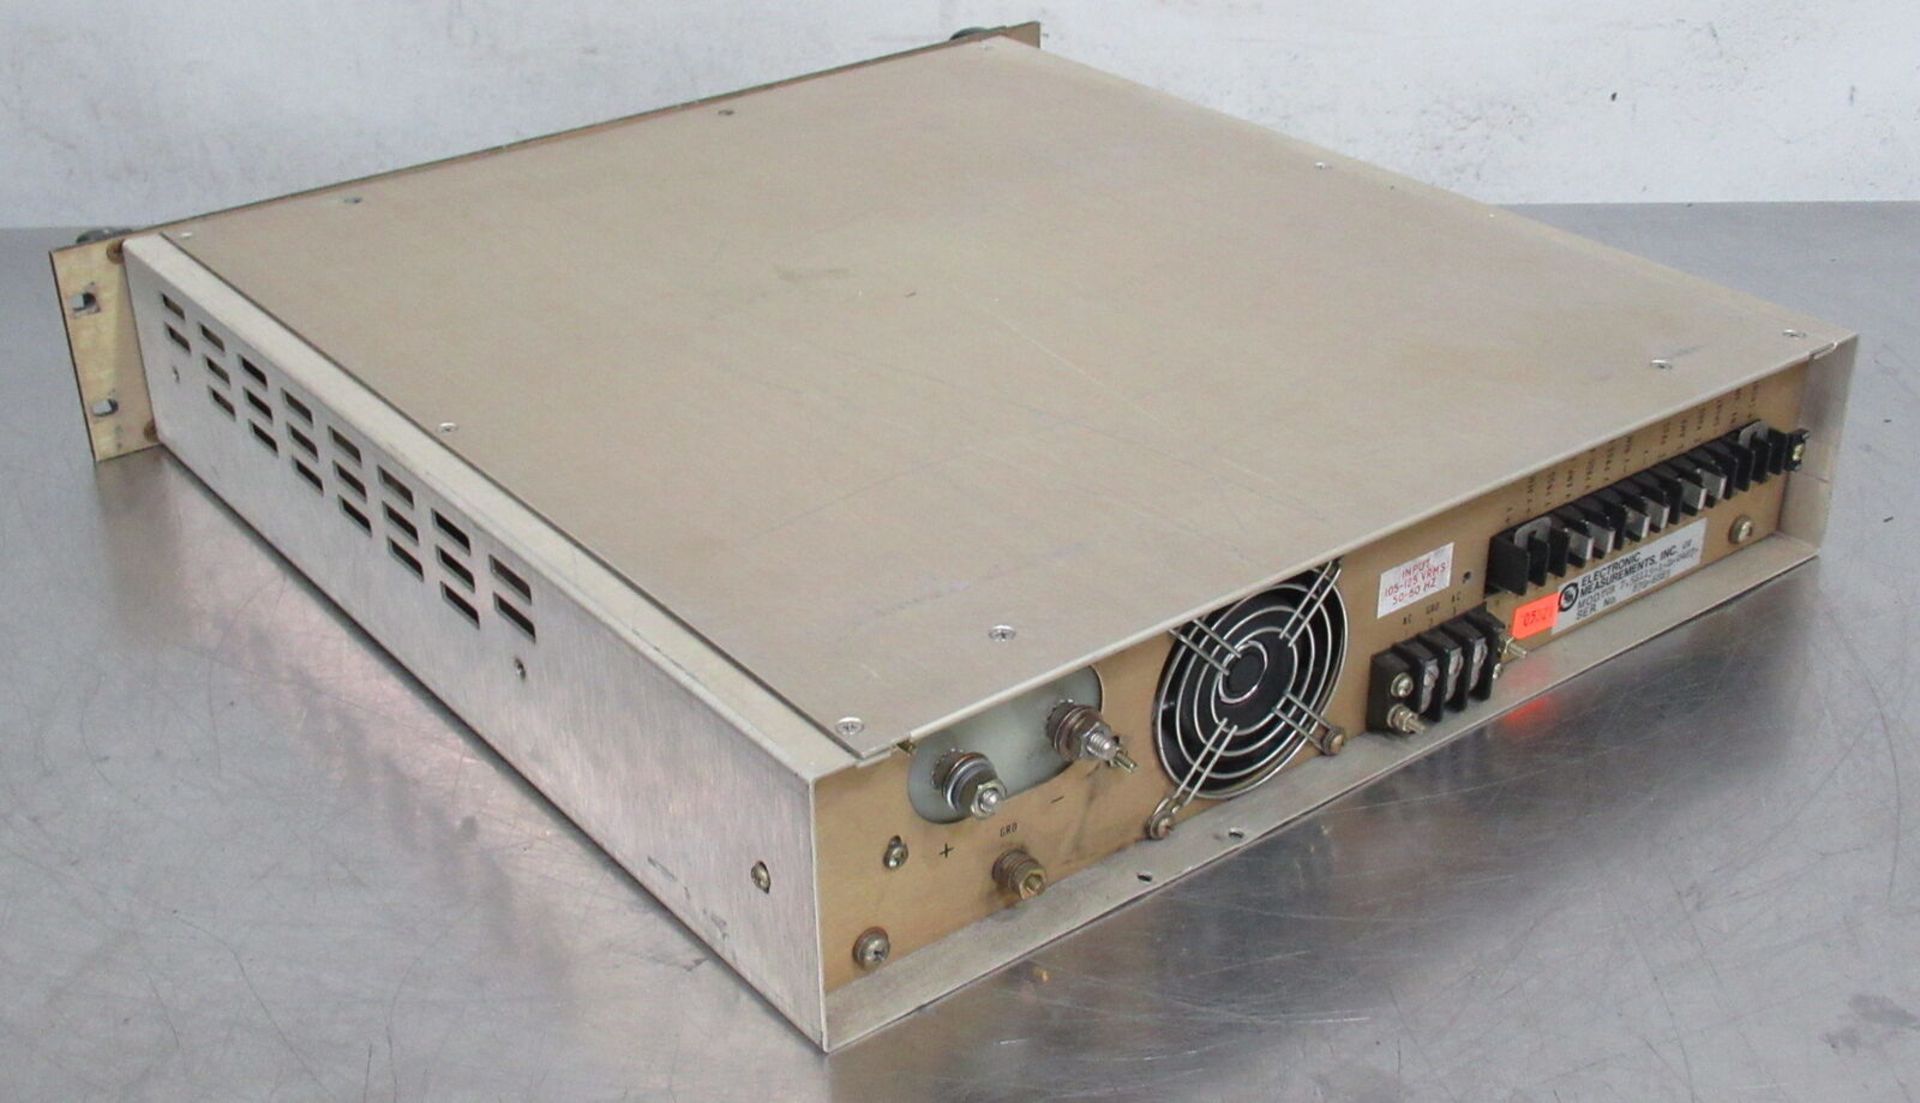 EMI TCR7.5S115 Digital DC Power Supply TCR7.5S115-1-D-0487 - Gilroy - Image 3 of 4